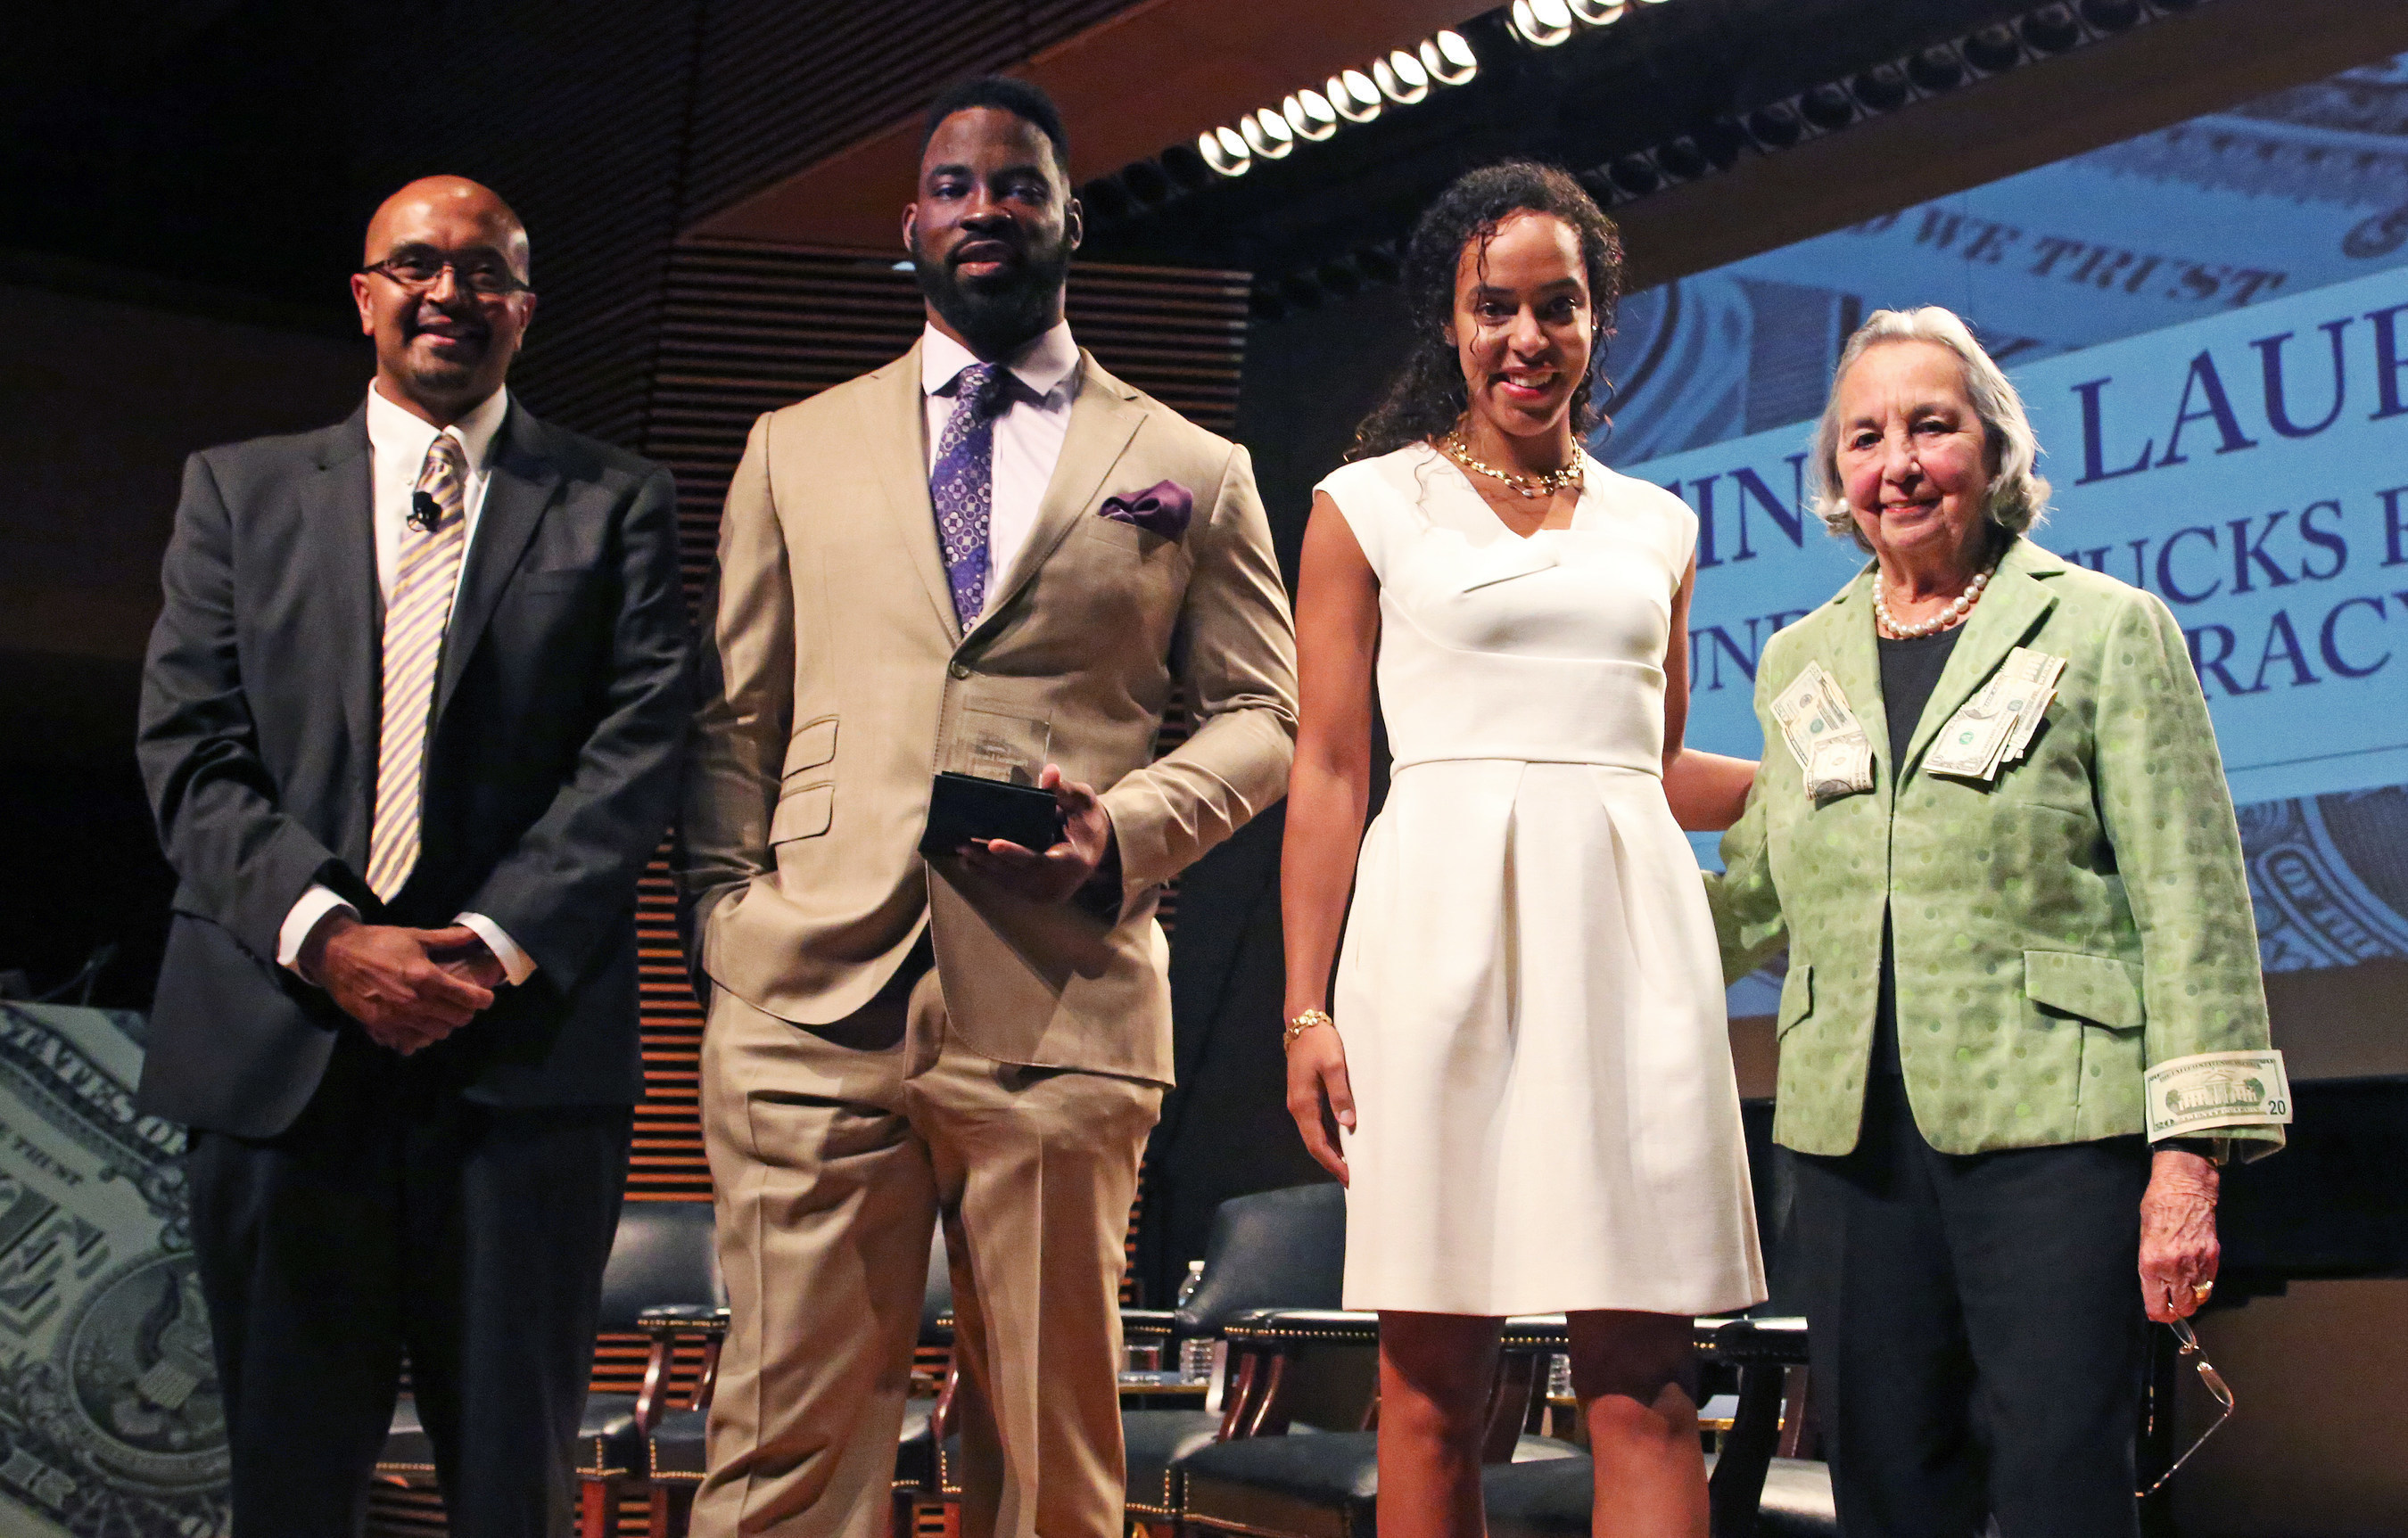 Teachers College, Columbia University honored former NY Giants Defensive End Justin Tuck and his wife Lauran Tuck, who also gave the keynote address during an event highlighting its Cowin Financial Literacy Program on April 21. Pictured (l.-r.): Cowin program faculty director and Teachers College professor Anand Marri, Justin Tuck, Lauran Tuck, Teachers College trustee and program founder Joyce B. Cowin.